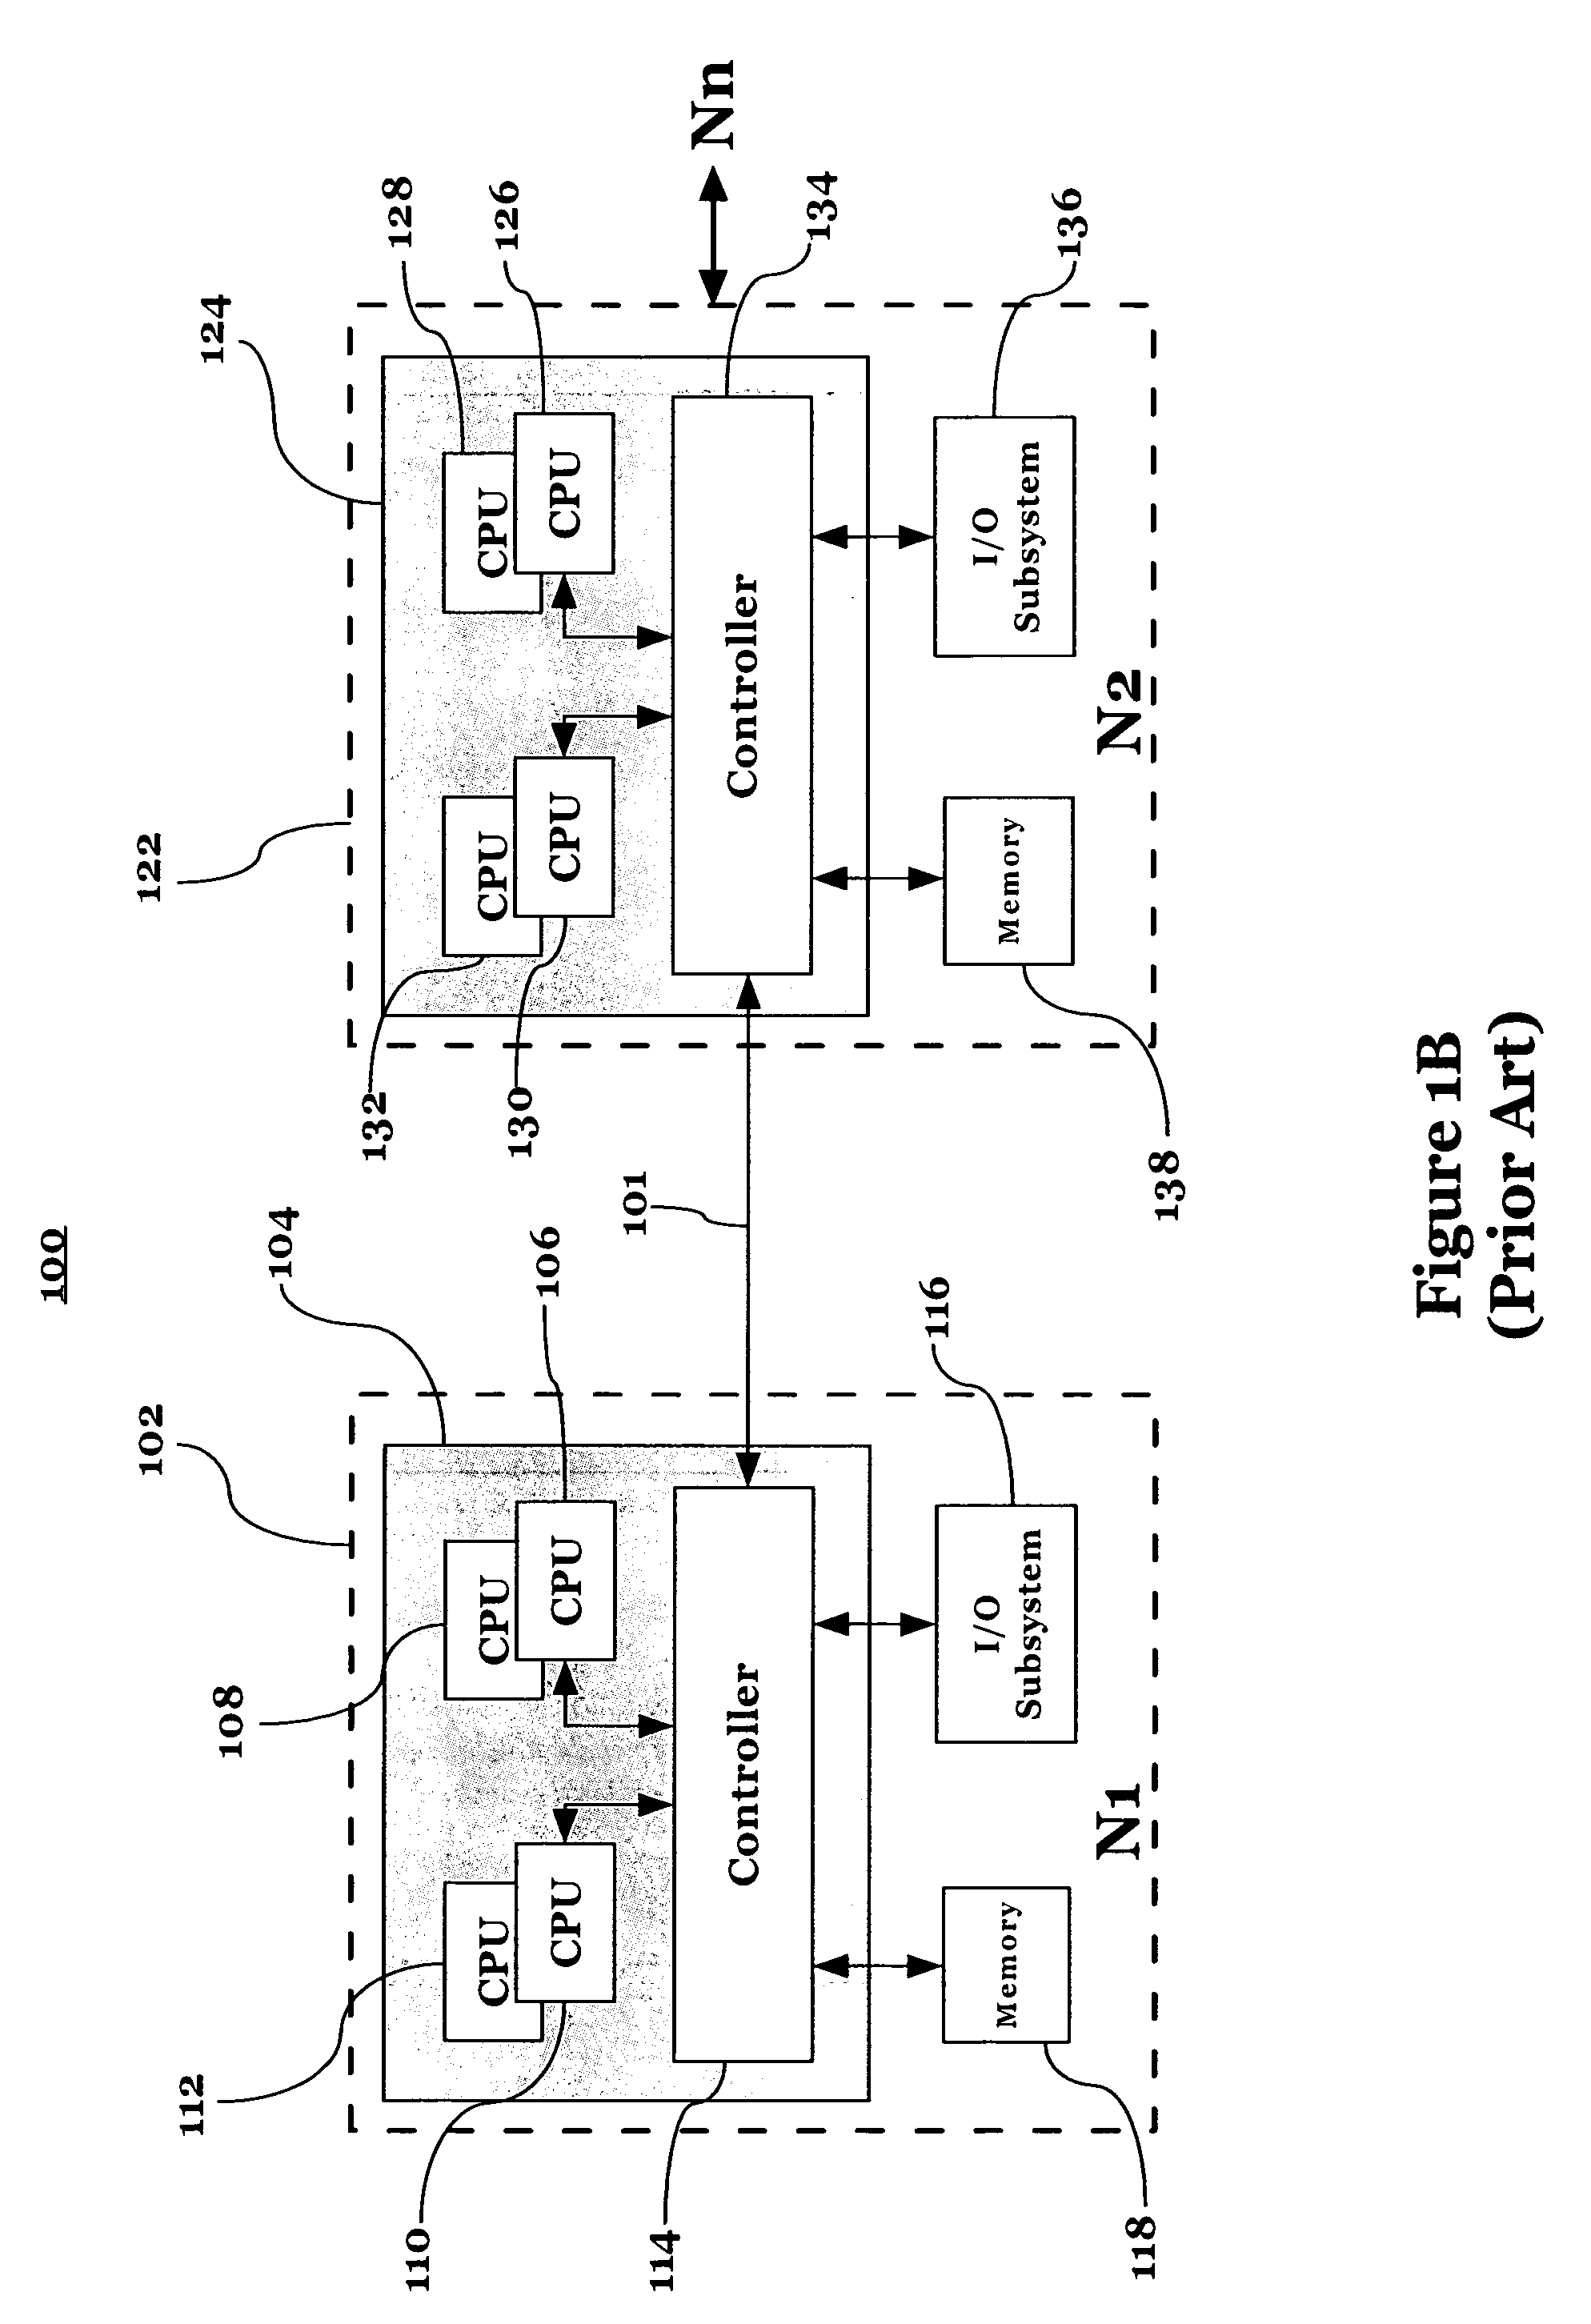 System management architecture for multi-node computer system